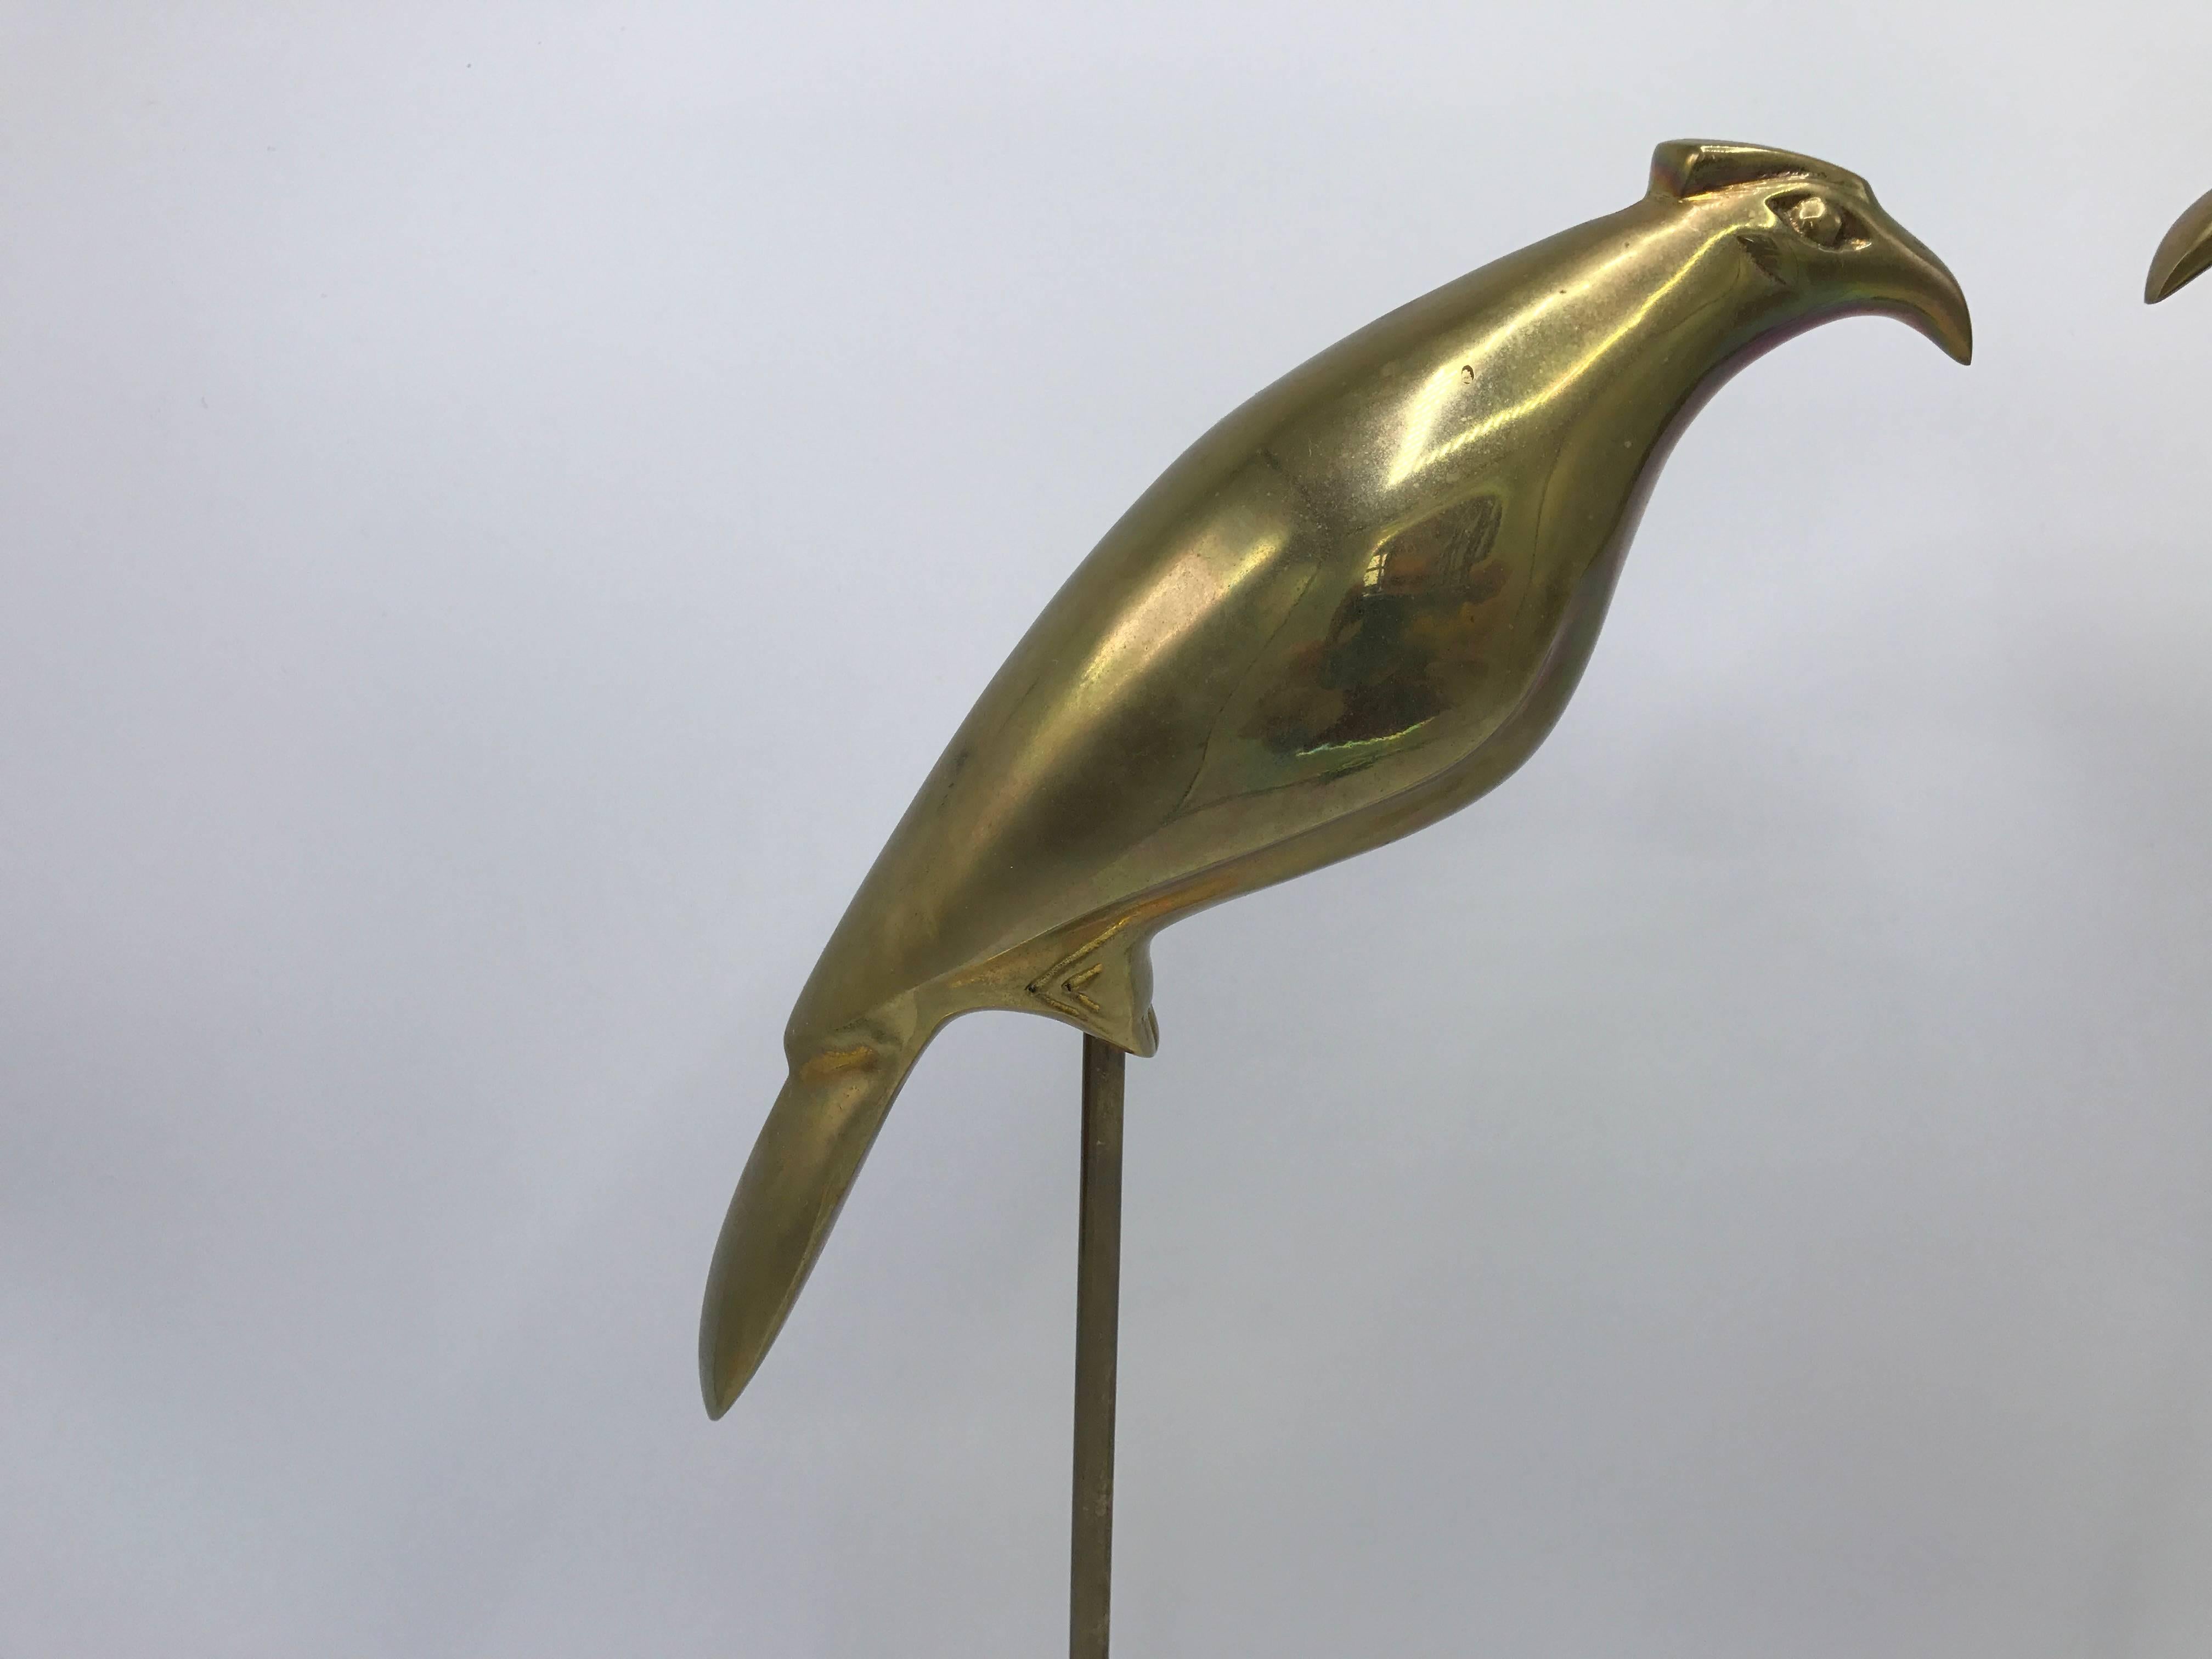 Offered is a fabulous, pair of 1960s Italian brass parakeet bird sculptures. Each bird is mounted to a heavy, solid-brass stand.